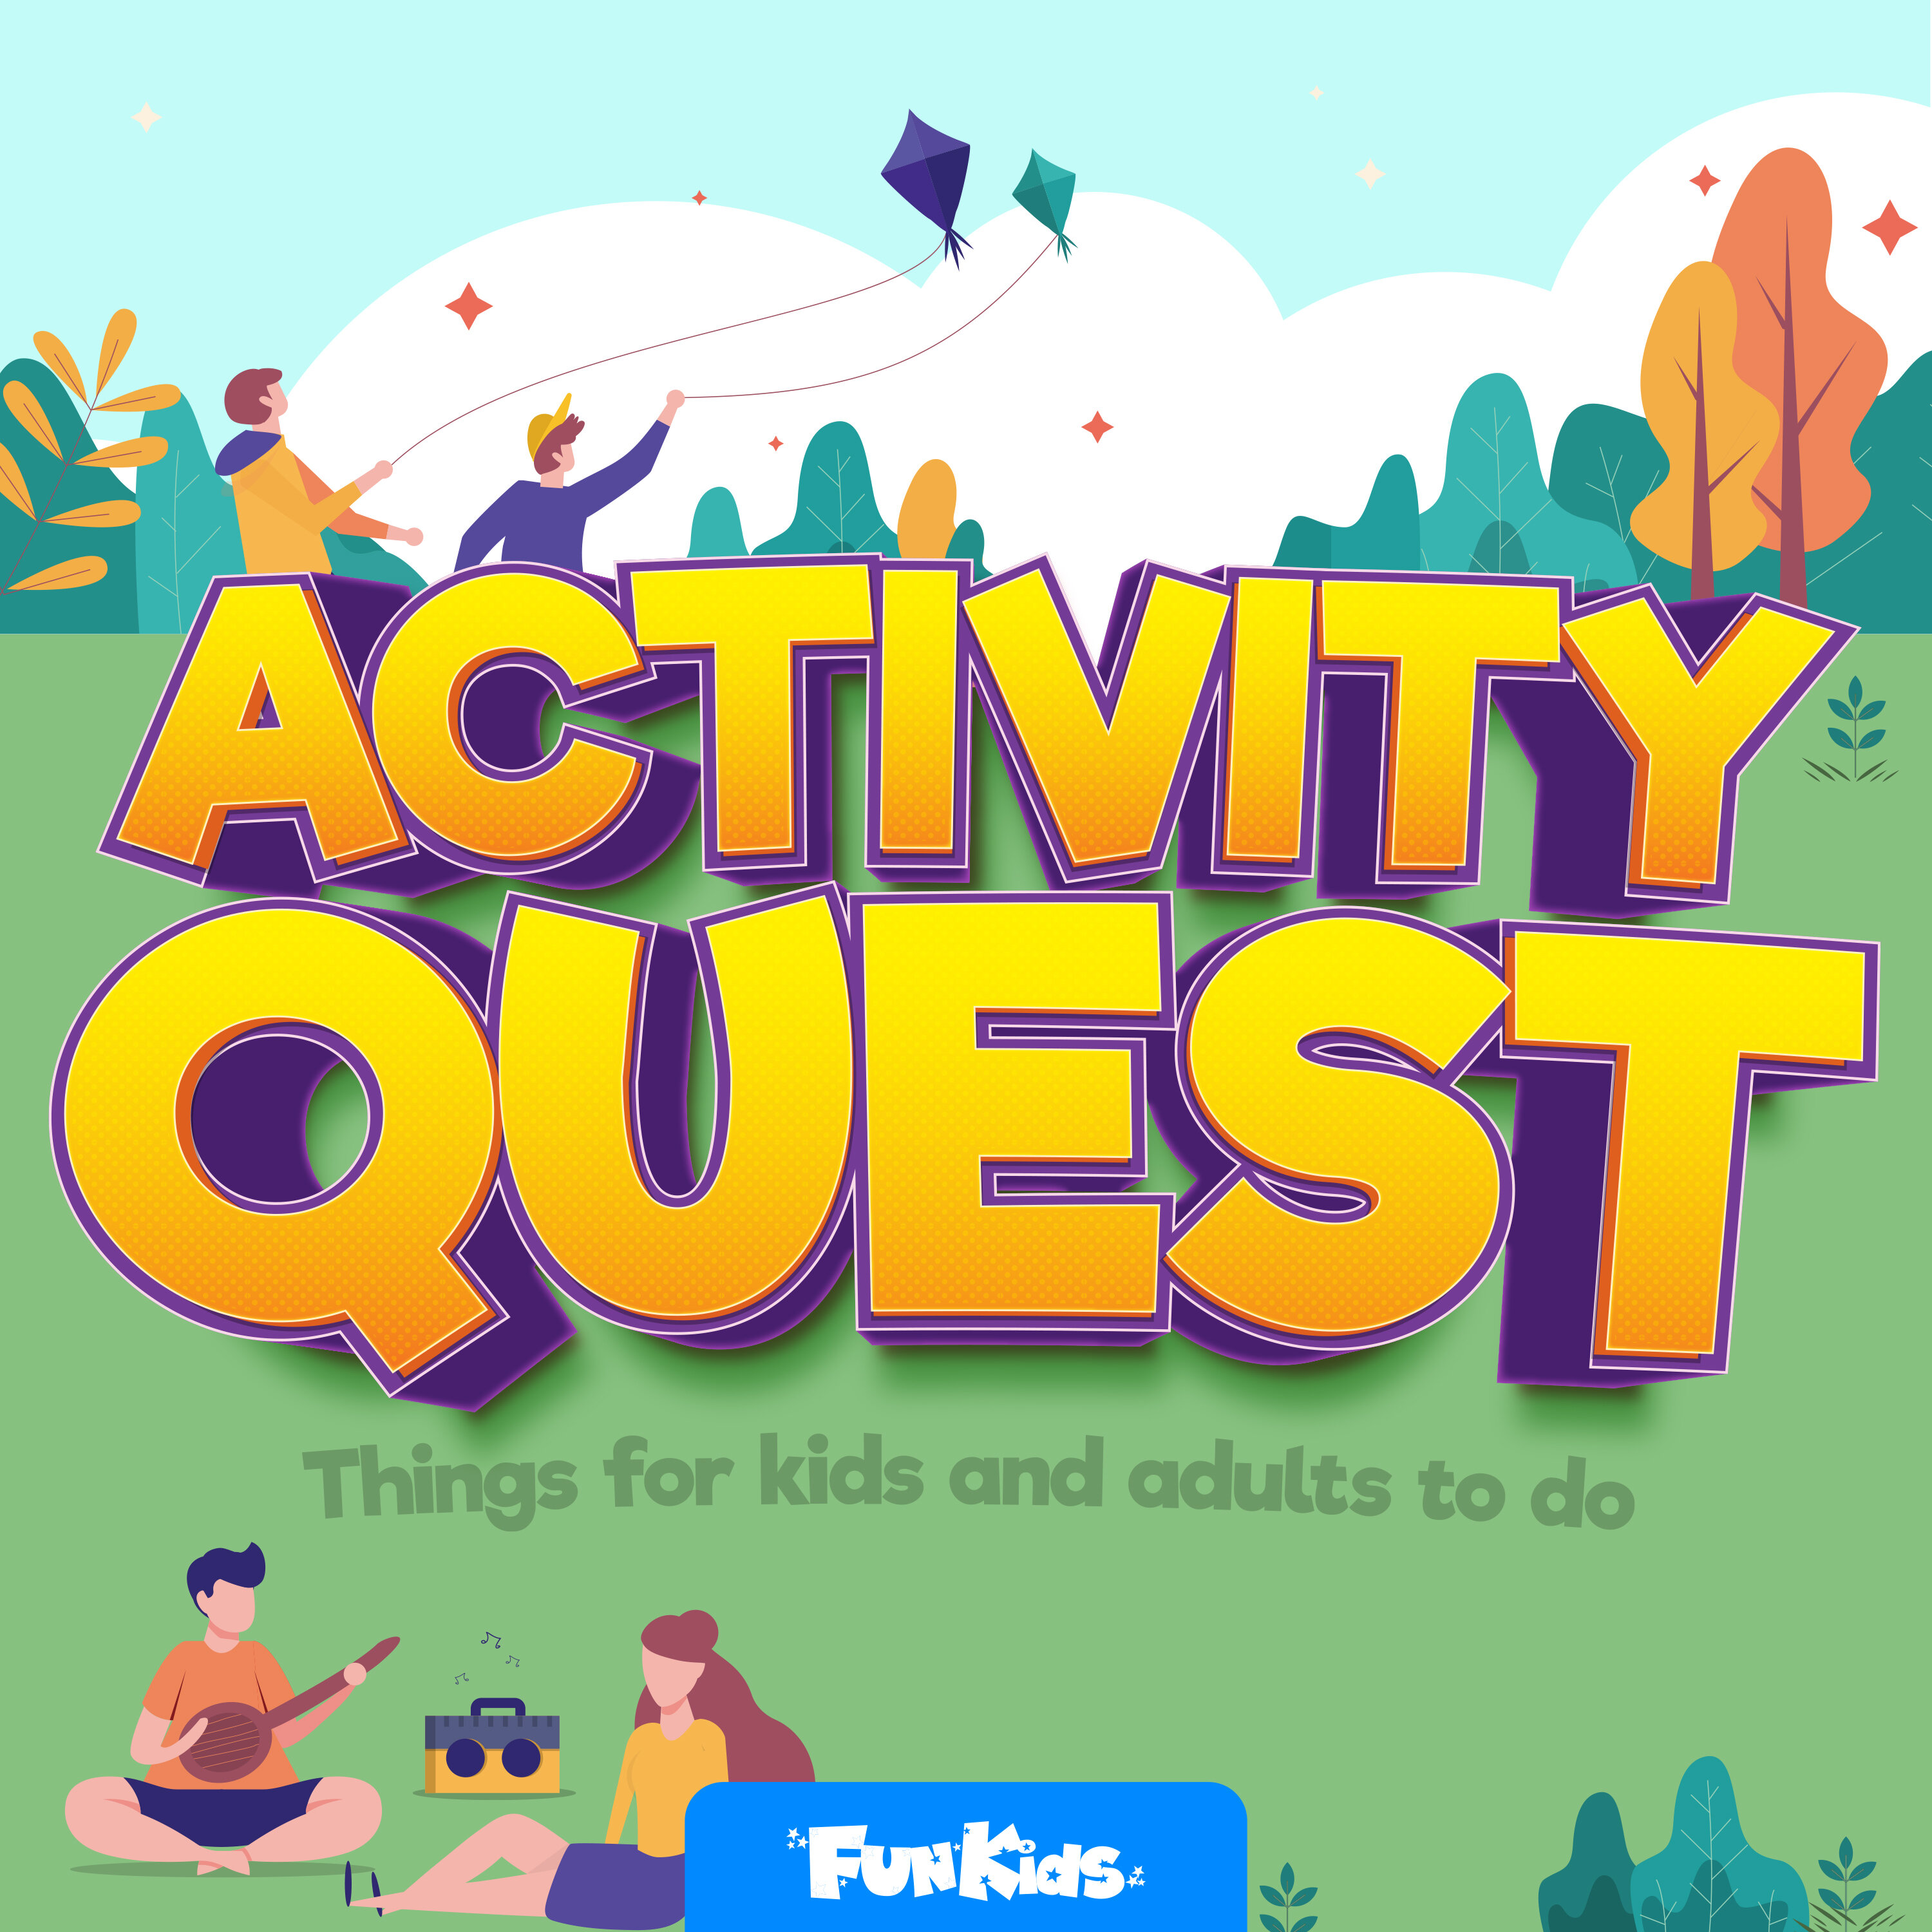 Activity Quest: Days out and crafts for kids podcast show image